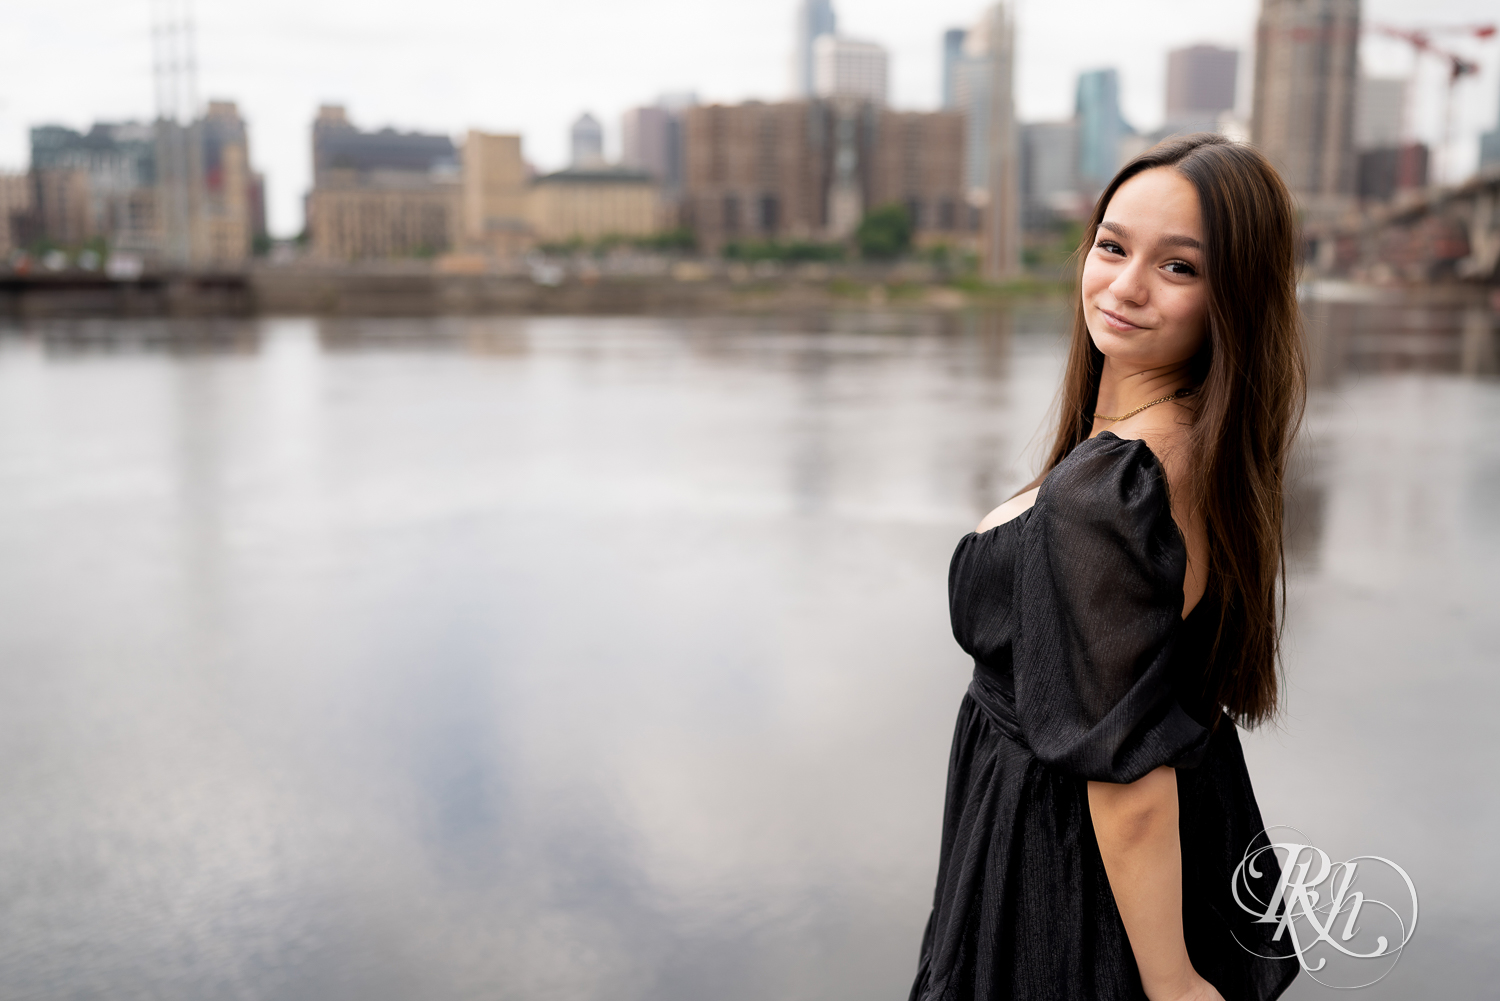 Lexi posing in a dress dress for senior photography in Minneapolis, Minnesota with the skyline in the background.